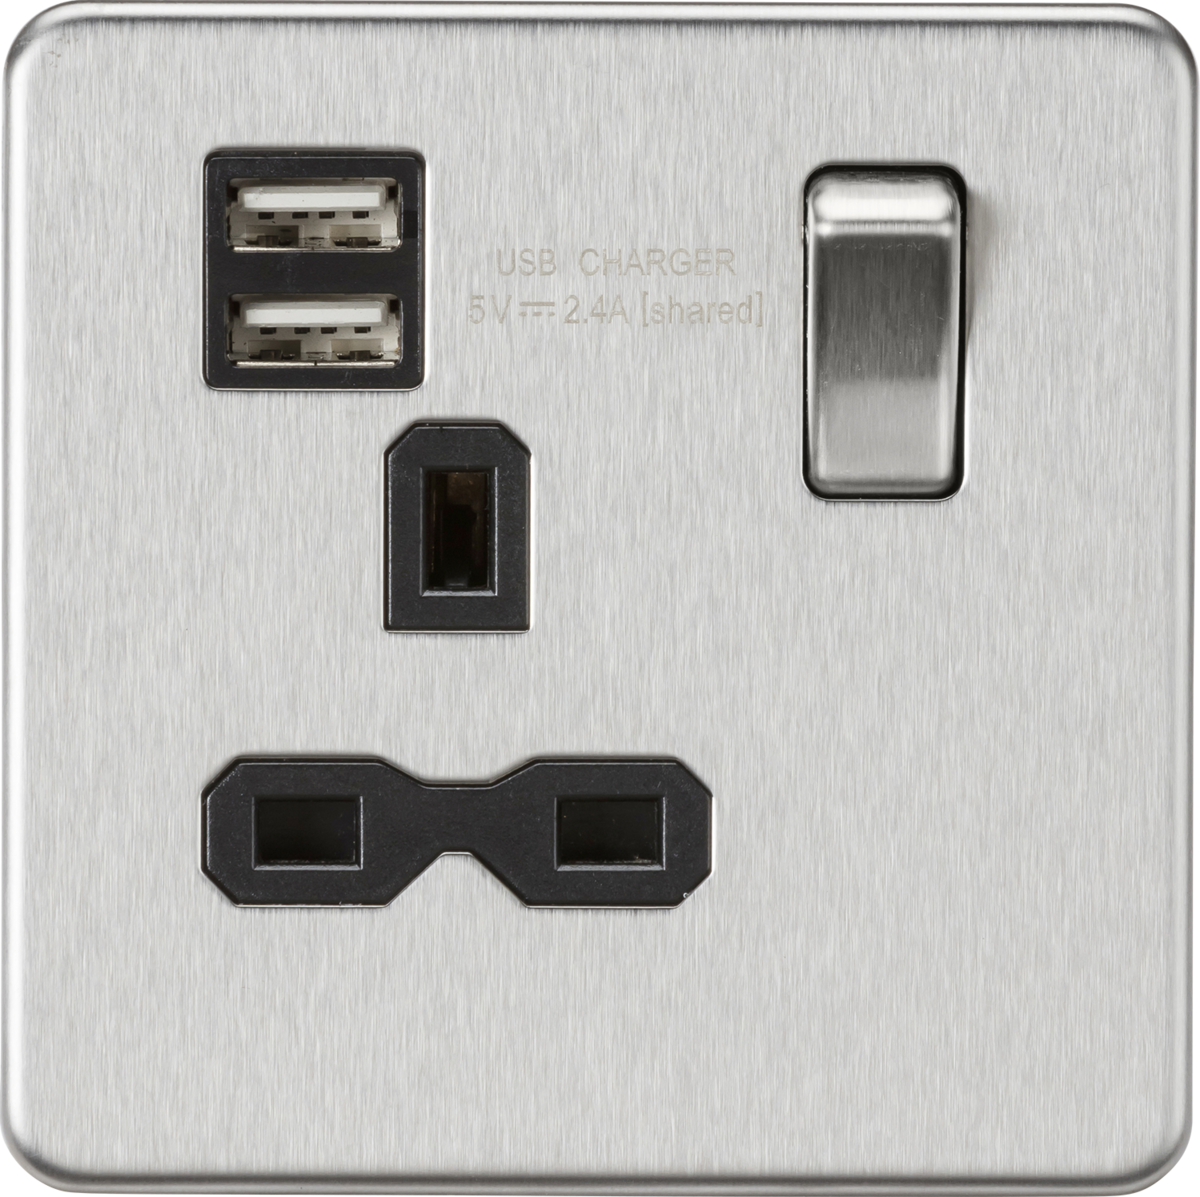 Screwless 13A 1G switched socket with dual USB charger (2.4A) - brushed chrome with black insert